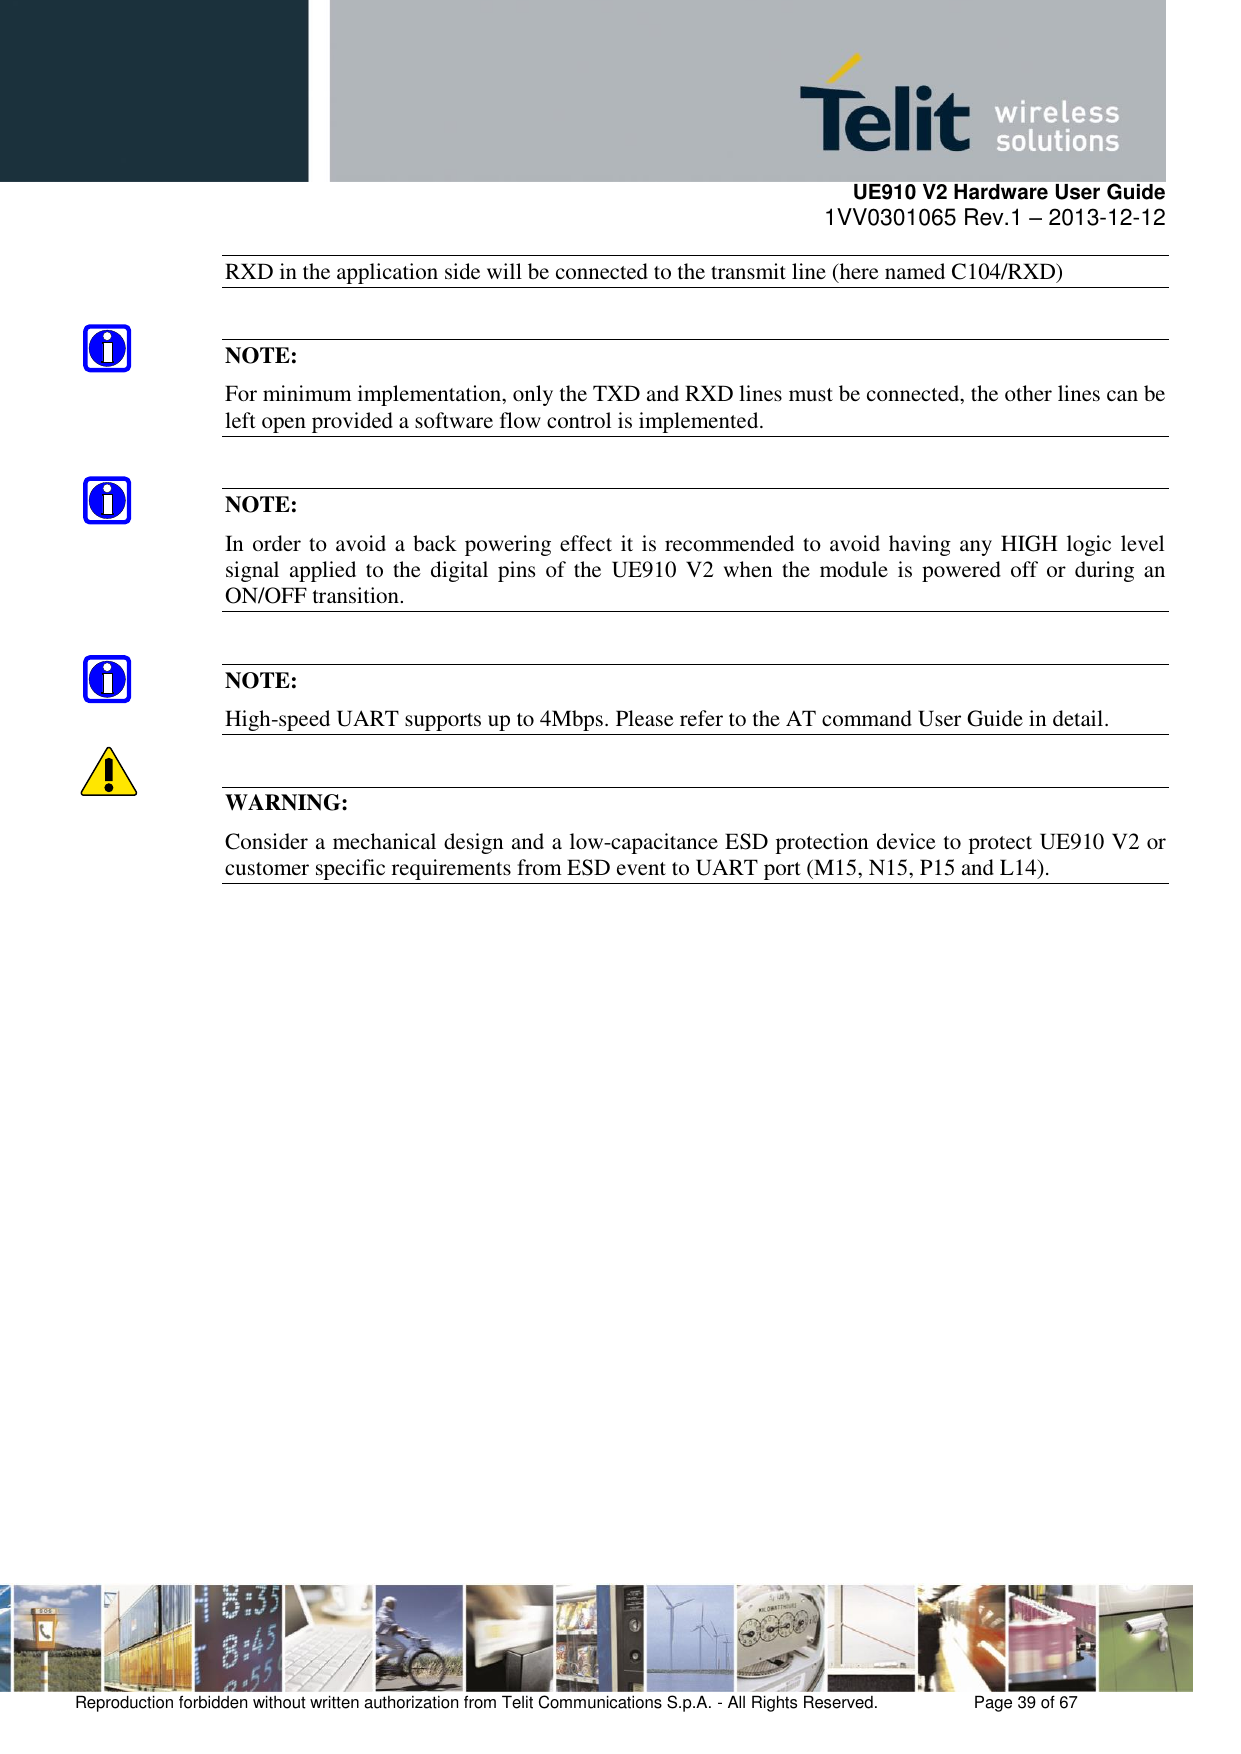     UE910 V2 Hardware User Guide 1VV0301065 Rev.1 – 2013-12-12  Reproduction forbidden without written authorization from Telit Communications S.p.A. - All Rights Reserved.    Page 39 of 67                                                     RXD in the application side will be connected to the transmit line (here named C104/RXD)  NOTE: For minimum implementation, only the TXD and RXD lines must be connected, the other lines can be left open provided a software flow control is implemented.  NOTE: In order to avoid a back powering effect it is recommended to avoid having any HIGH logic level signal  applied  to  the  digital pins  of  the  UE910  V2 when  the  module is  powered off  or  during an ON/OFF transition.  NOTE: High-speed UART supports up to 4Mbps. Please refer to the AT command User Guide in detail.  WARNING: Consider a mechanical design and a low-capacitance ESD protection device to protect UE910 V2 or customer specific requirements from ESD event to UART port (M15, N15, P15 and L14).        